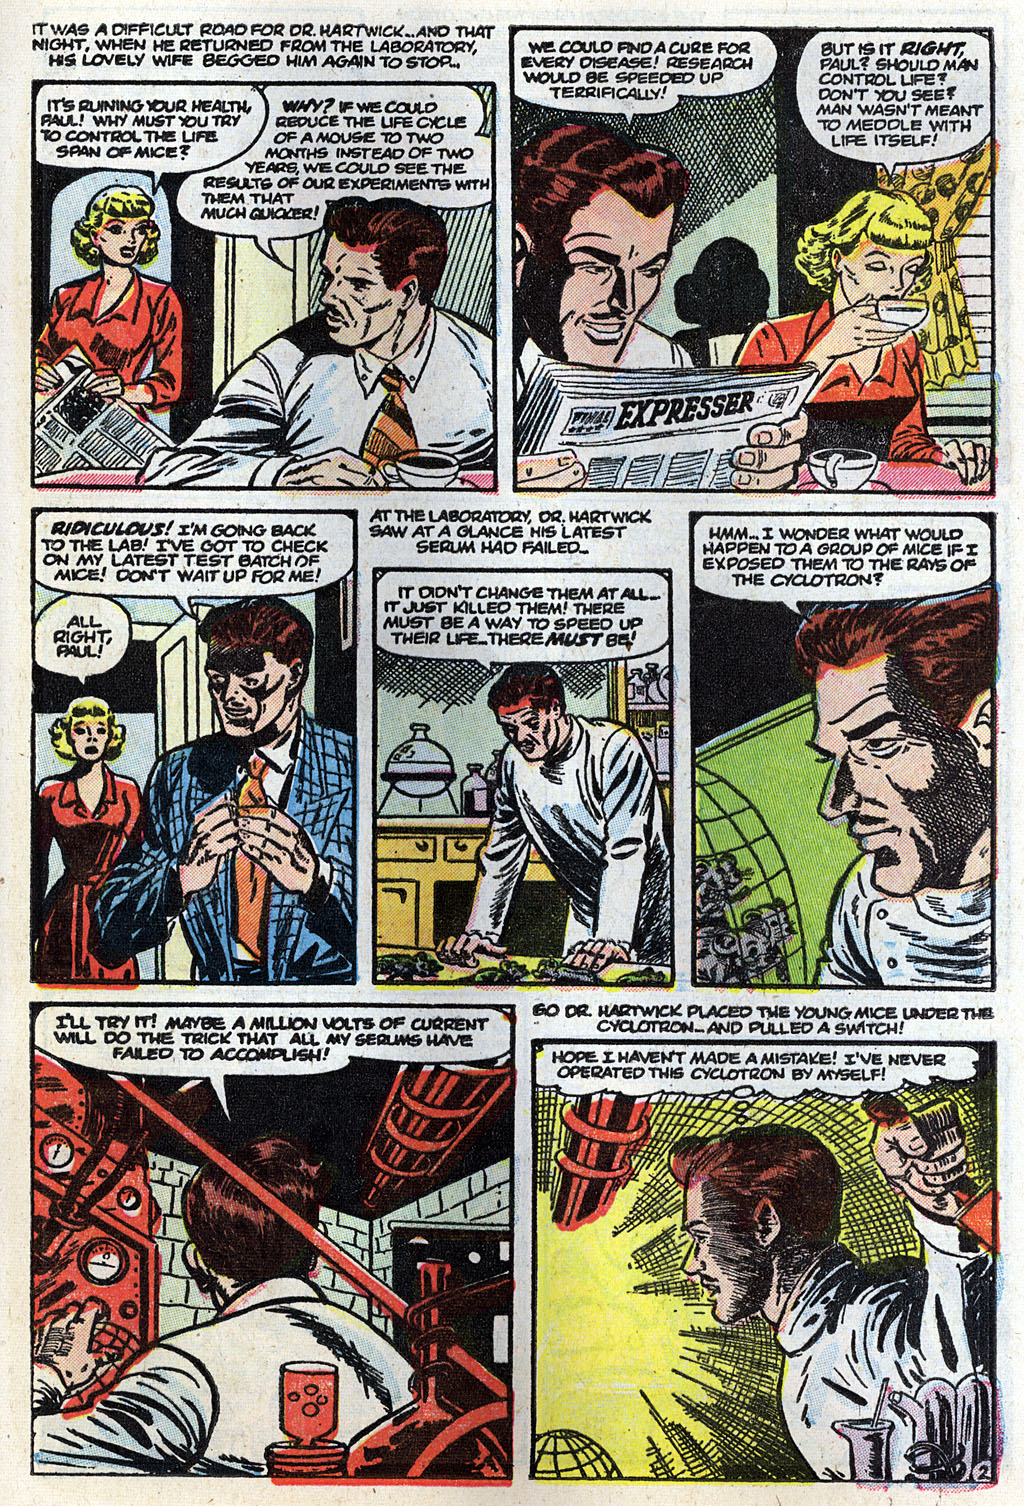 Marvel Tales (1949) 128 Page 16